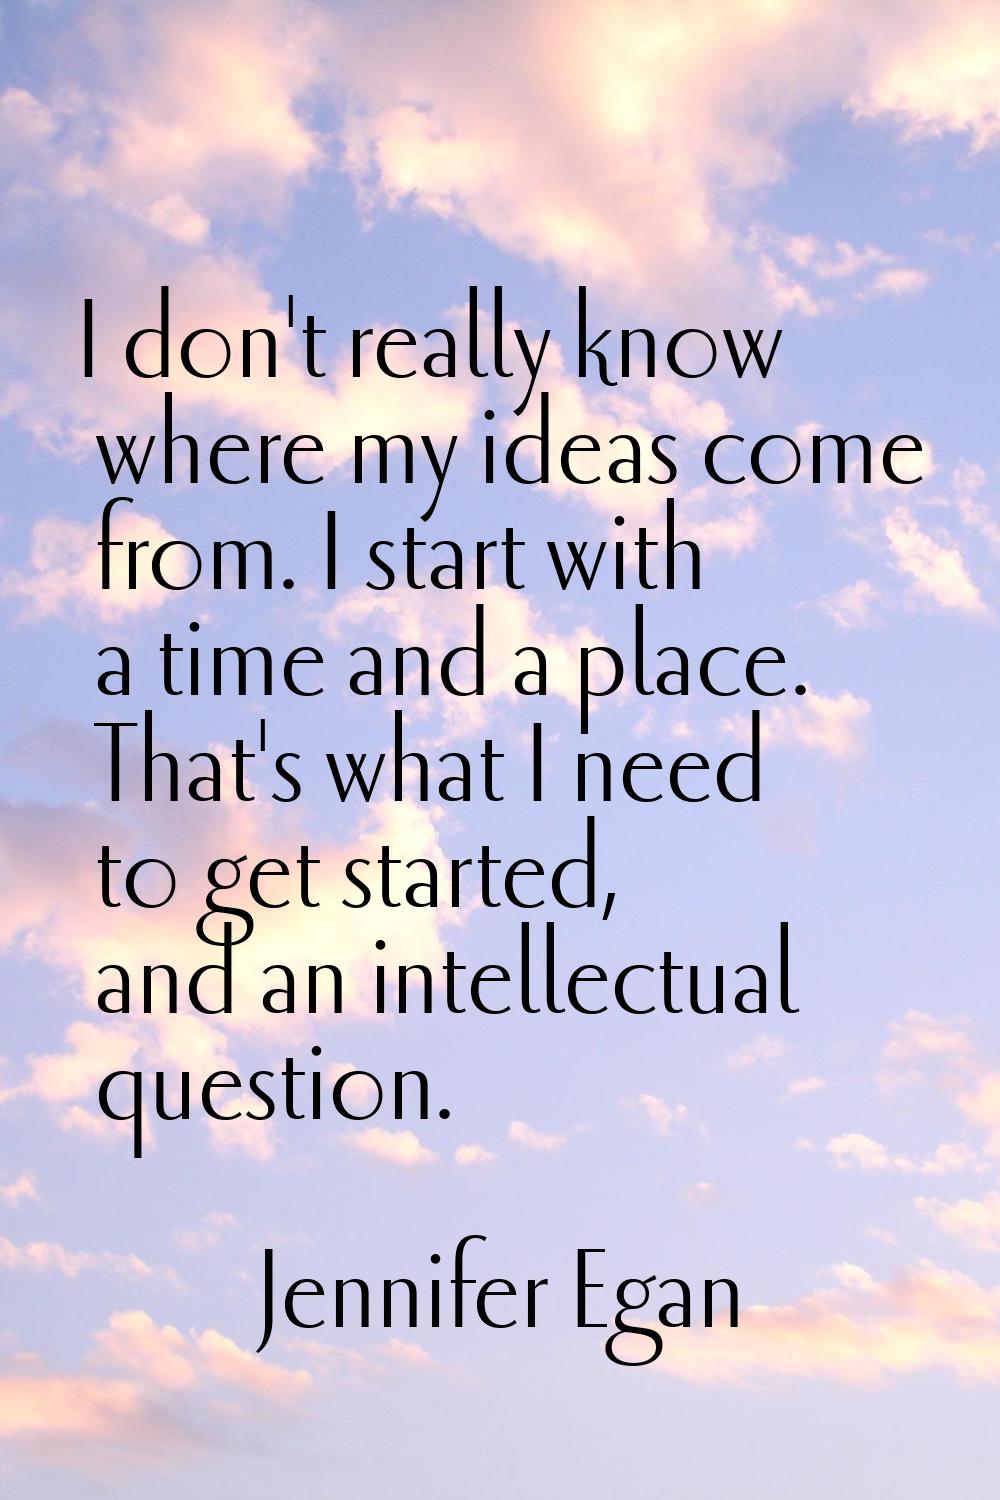 I don't really know where my ideas come from. I start with a time and a place. That's what I need t